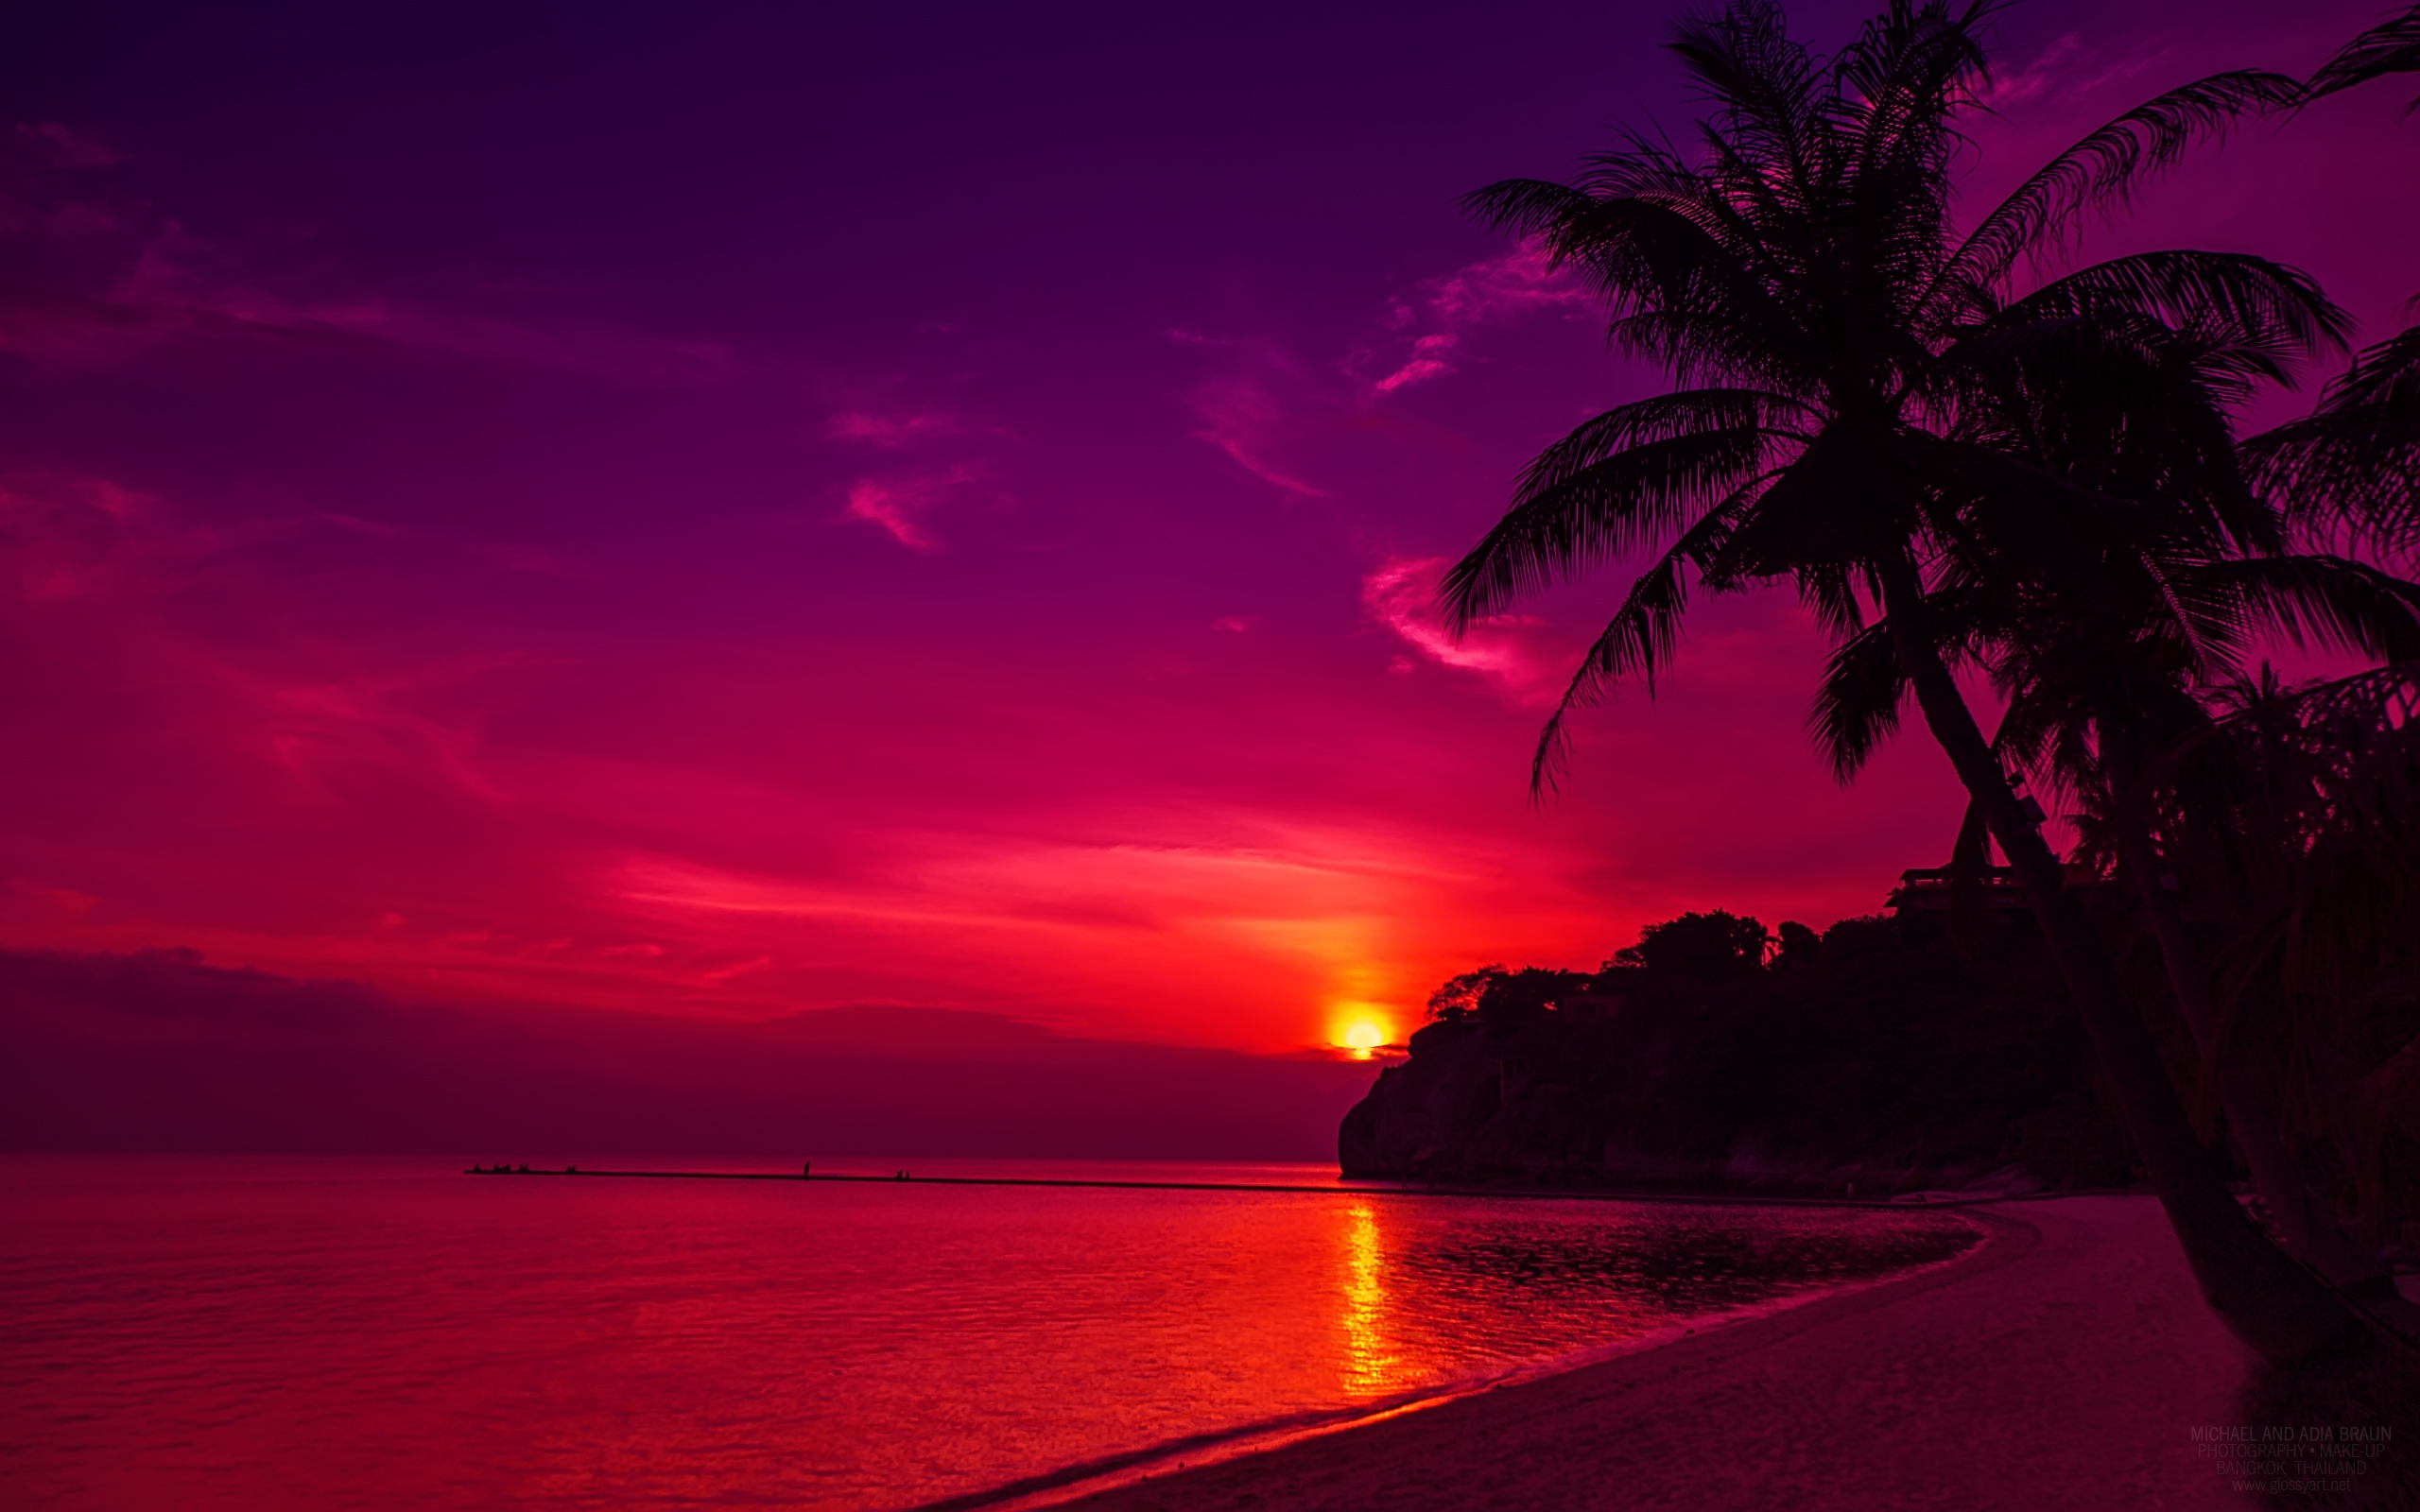 Sunset Wallpapers and Background Images   stmednet